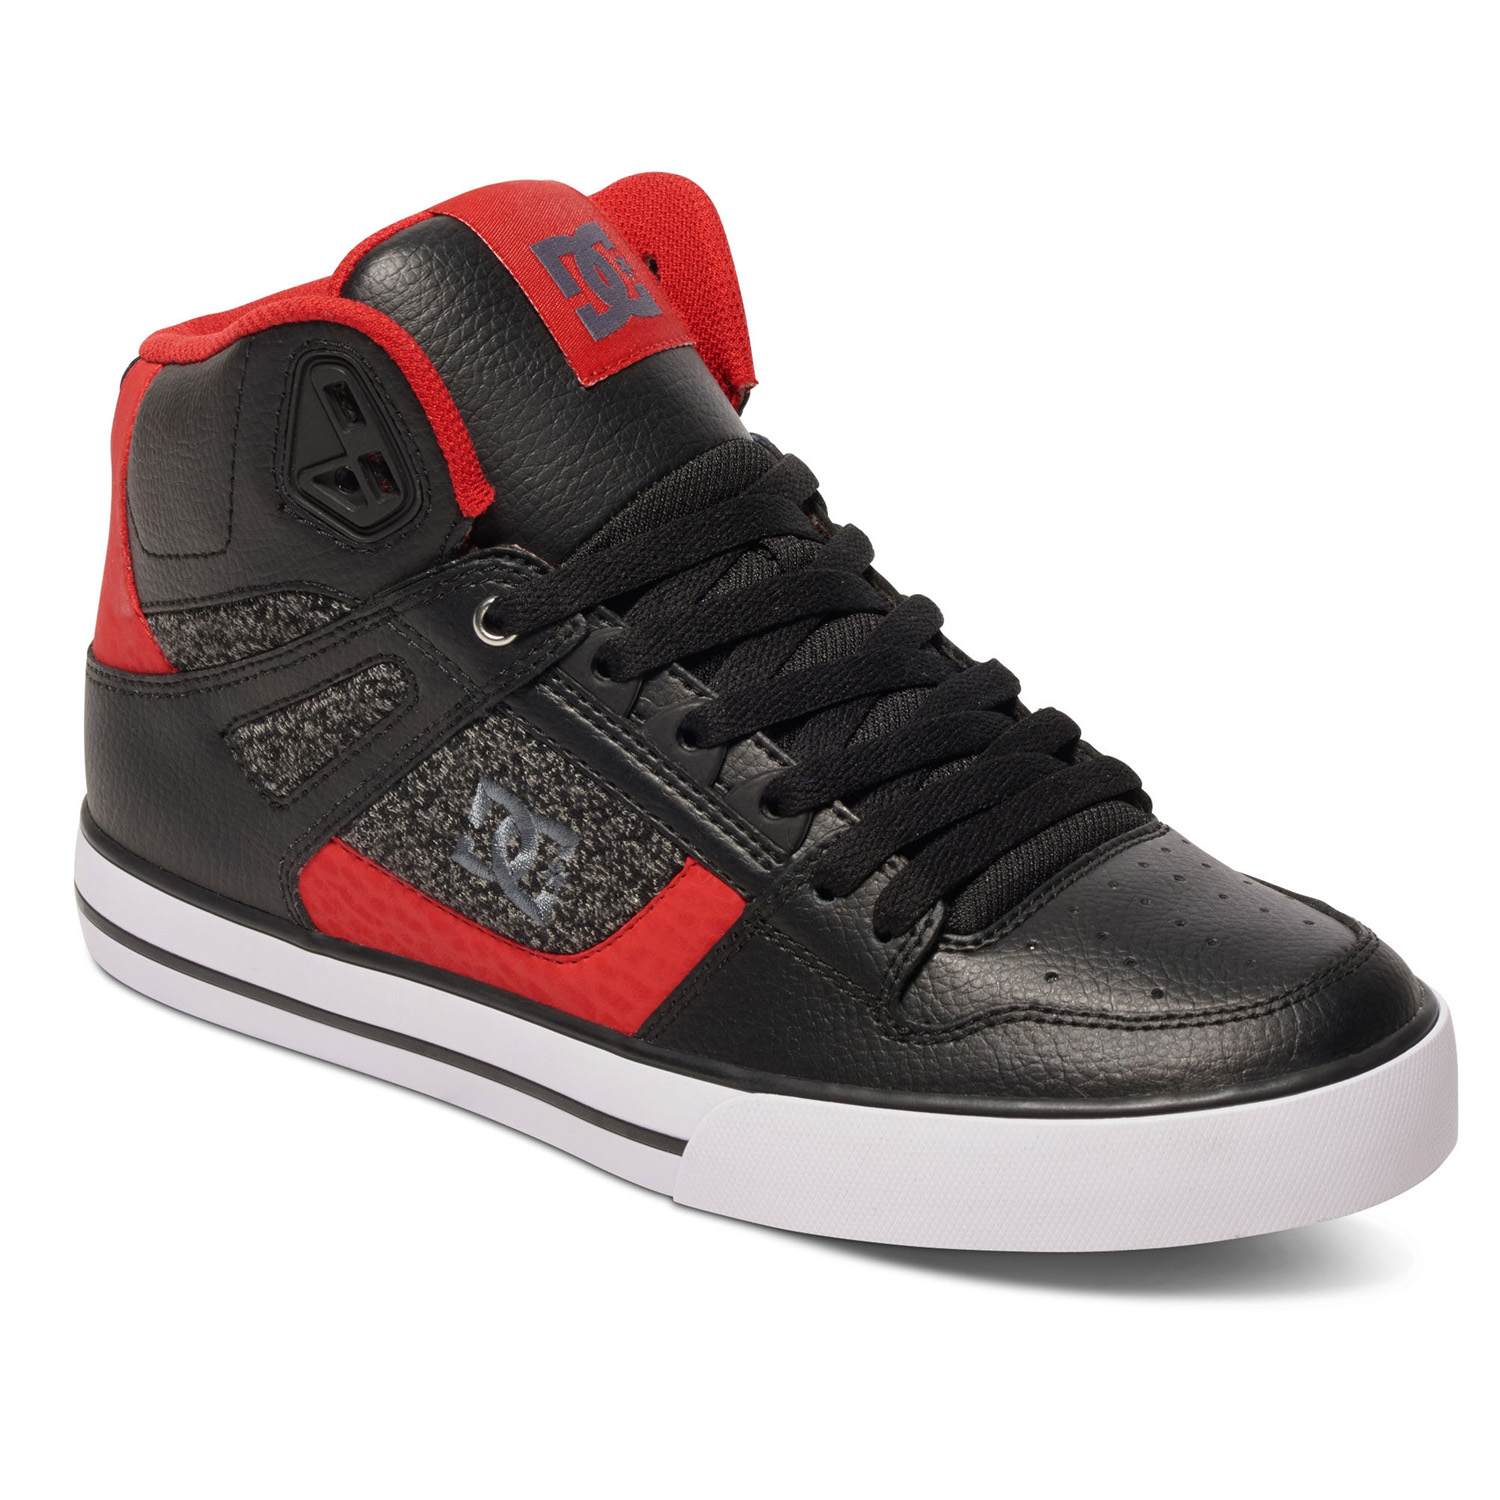 DC Chaussures Spartan High WC Black/Black/Red